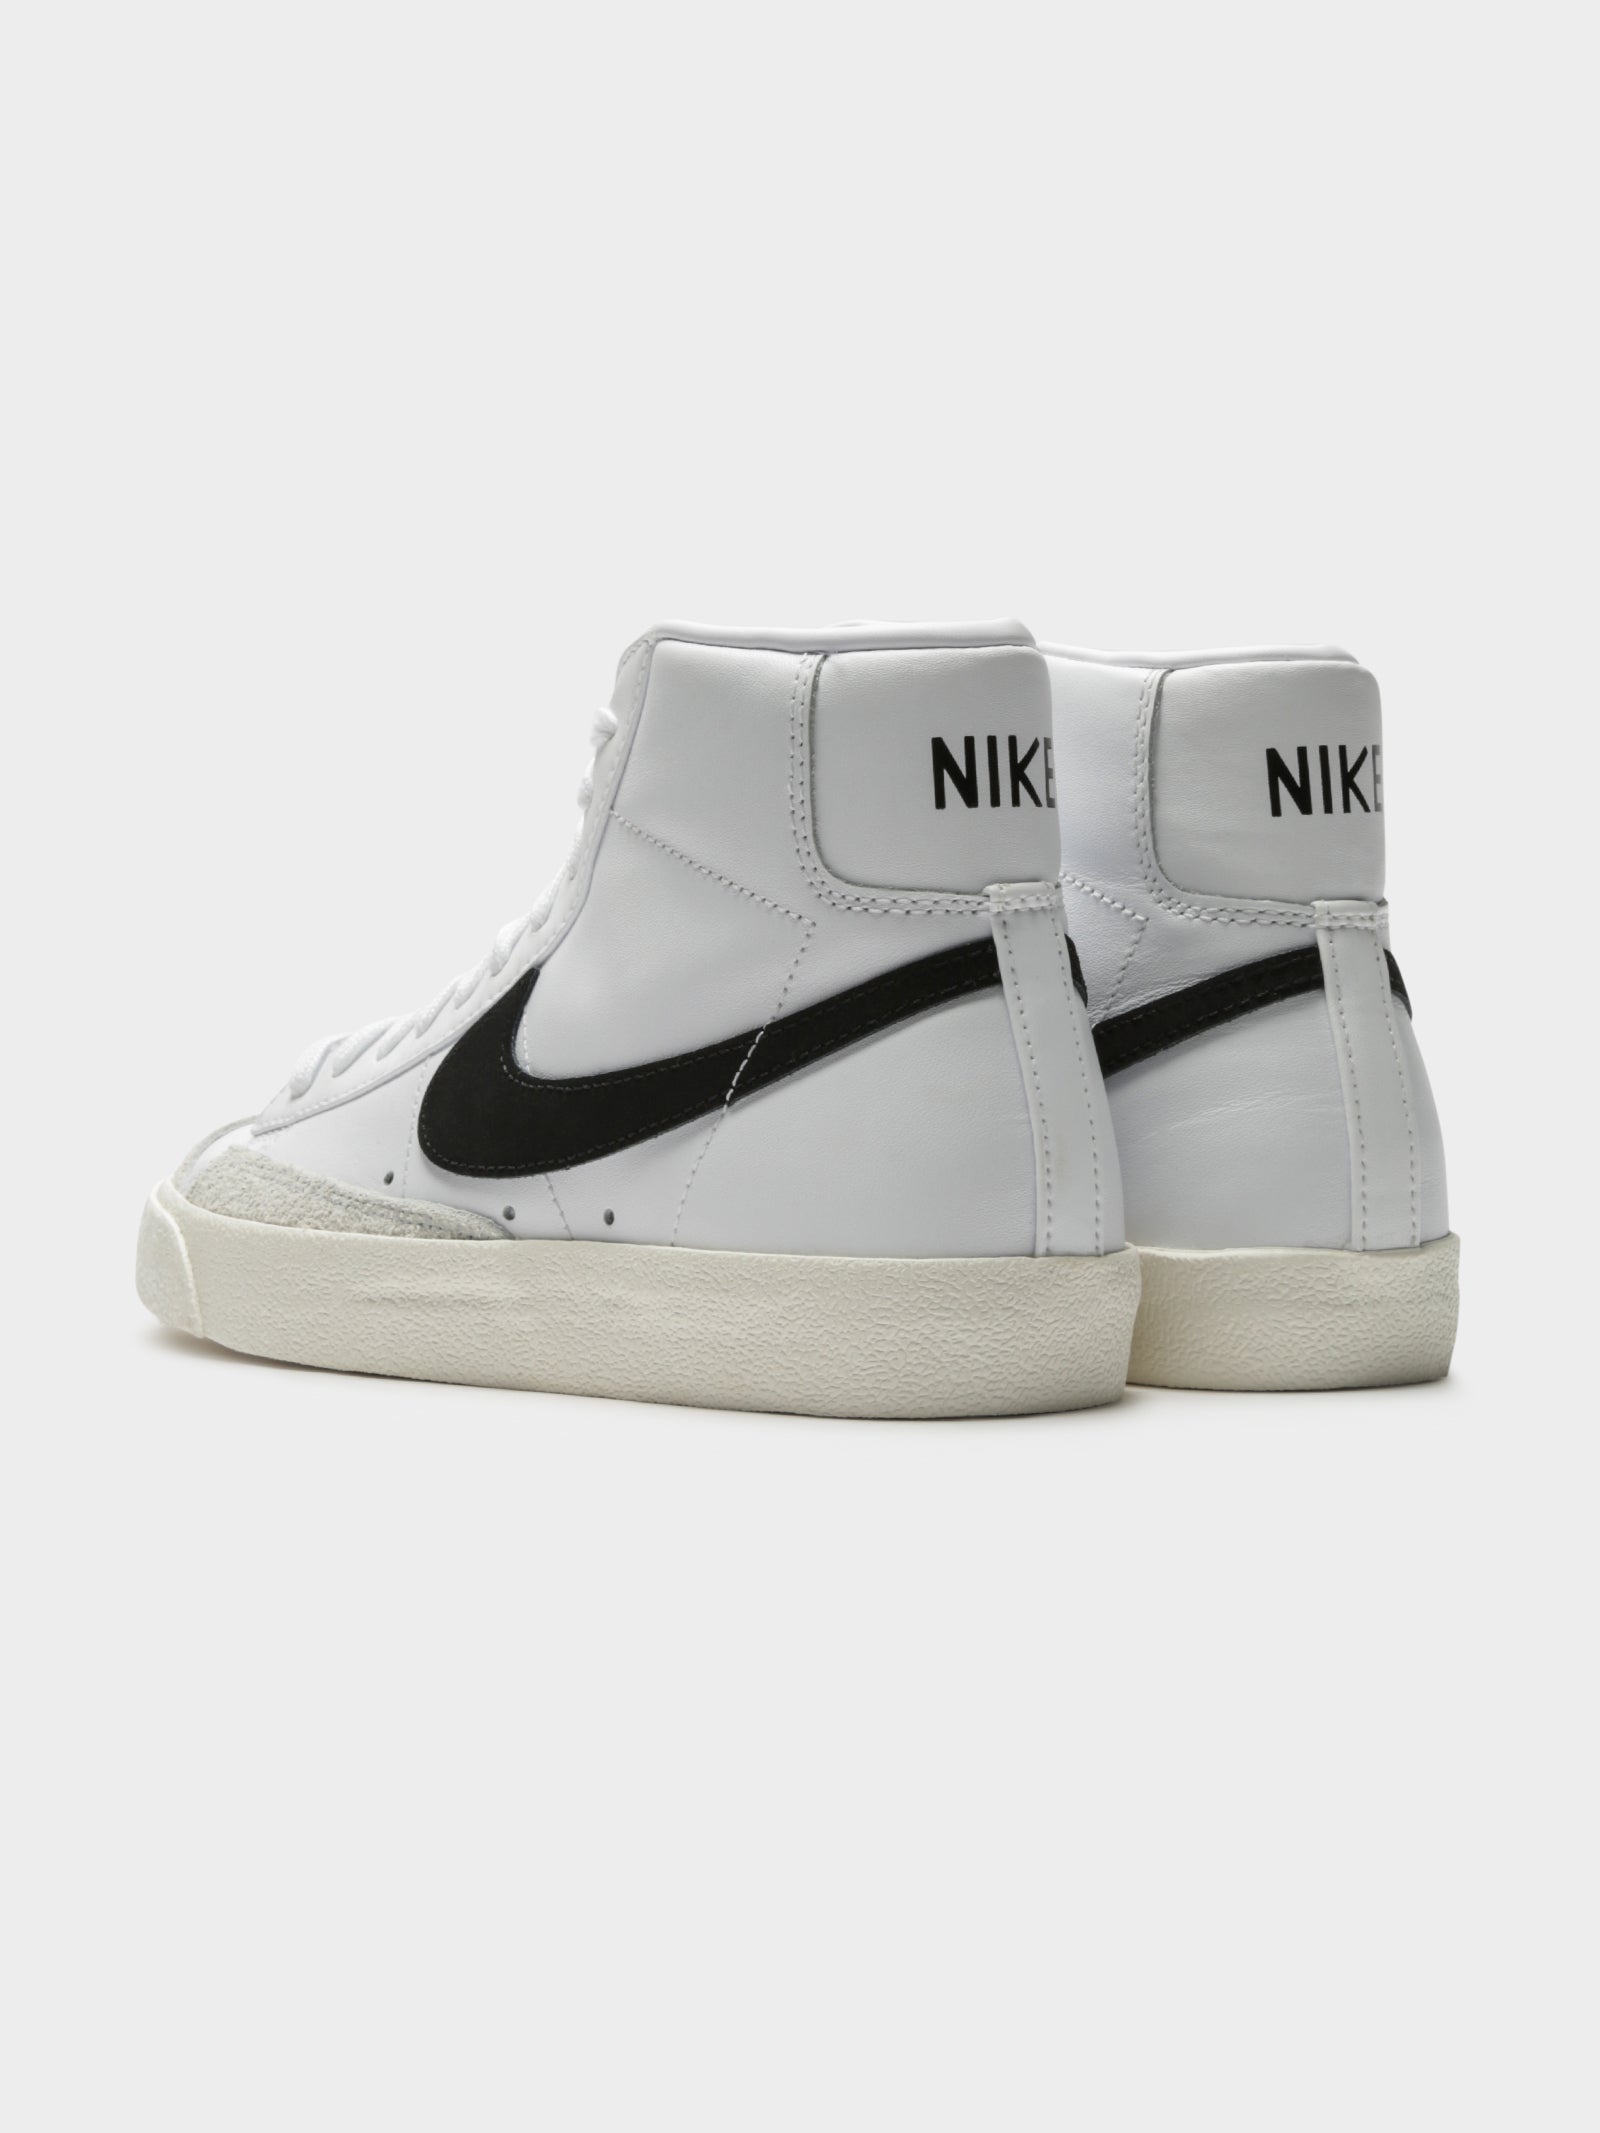 Womens Blazer Mid 77 High Top Sneakers in Black & White